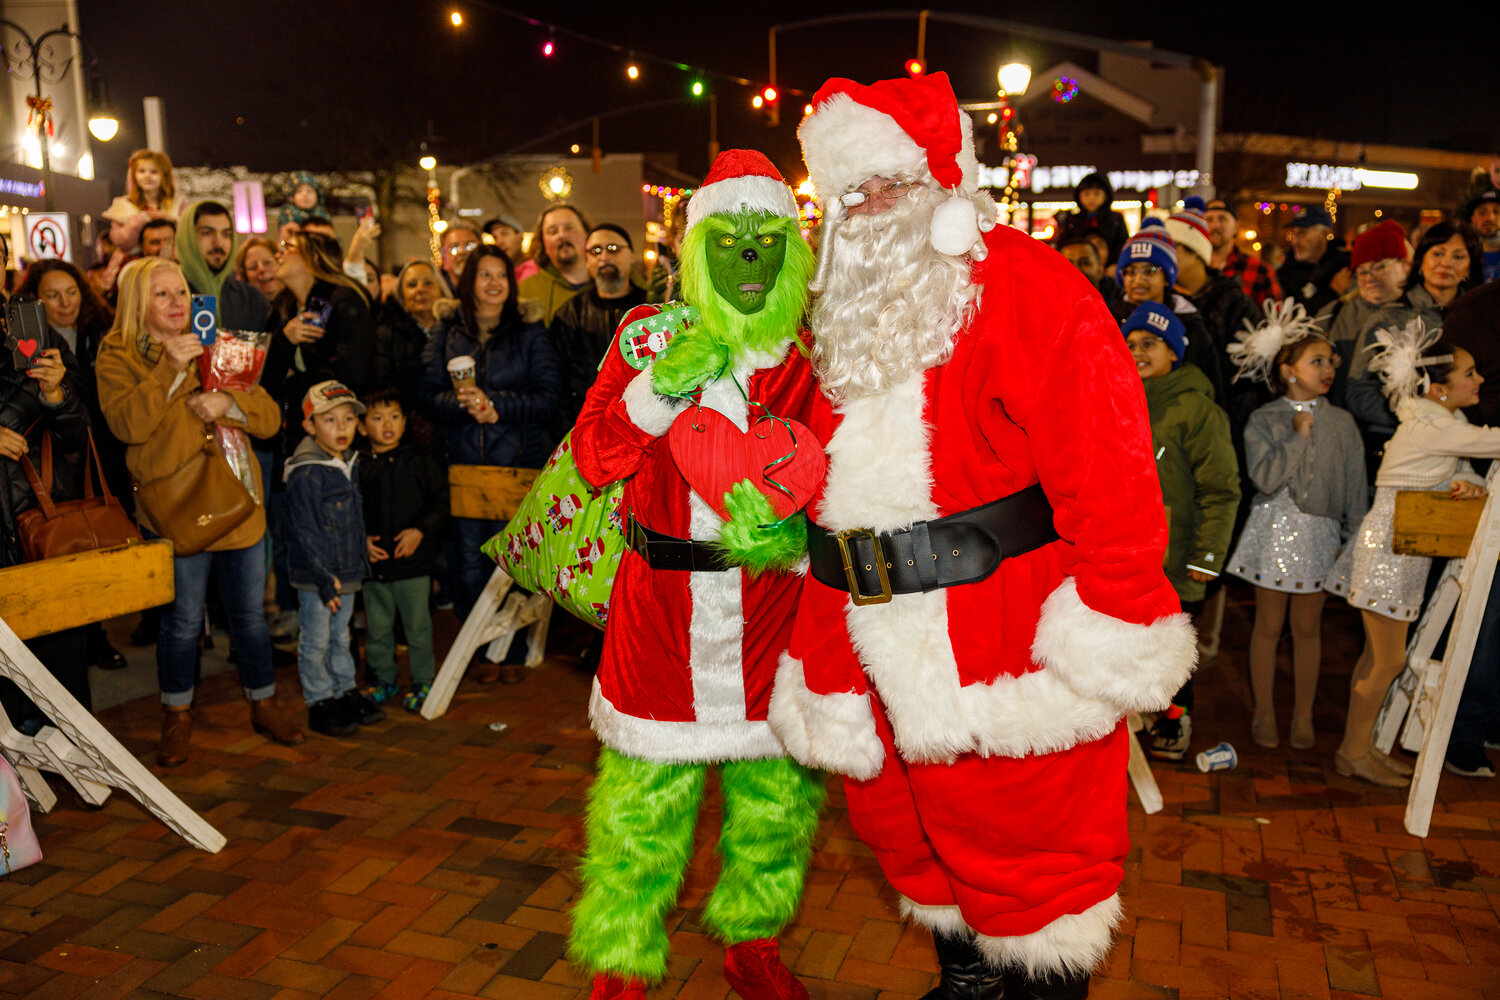 The Grinch and Santa Claus teamed up to spread holiday cheer around Lynbrook during the annual holiday celebration on Saturday.